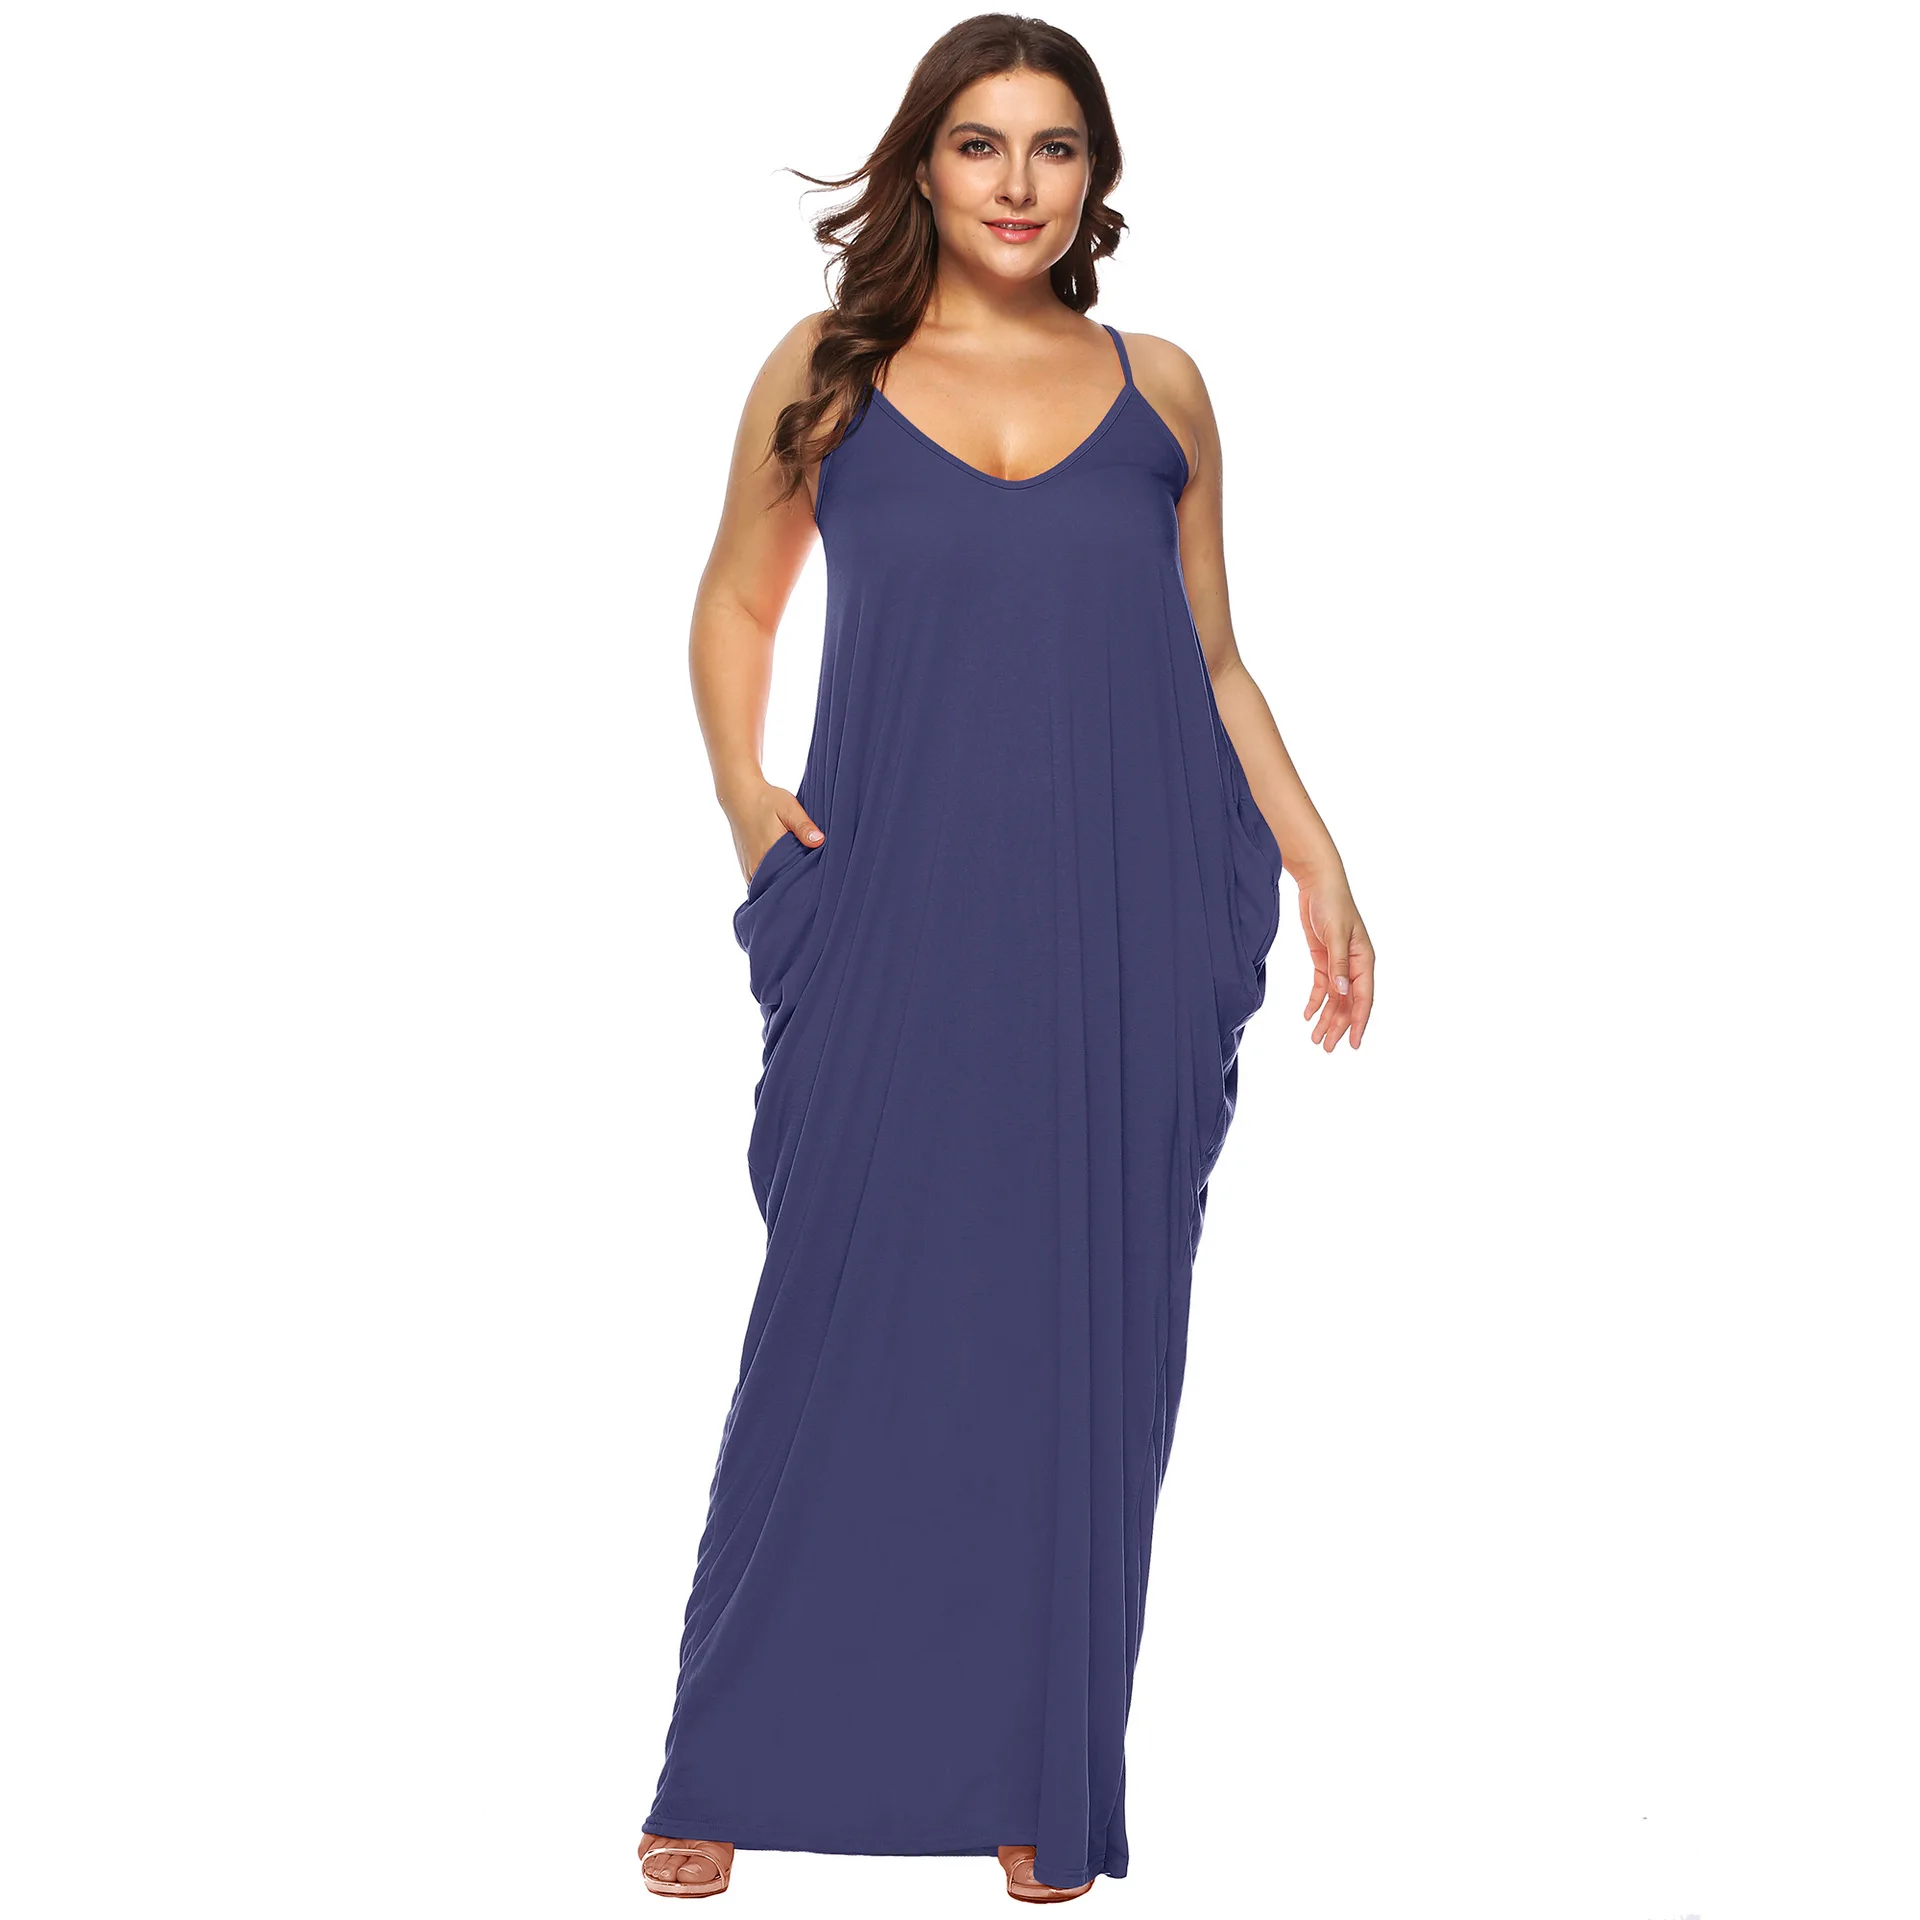 3XL Big Size Sheer Casual Maxi Dresses for Women Summer 2022 Plus Size Sexy Slip Dress Ladies Pocket Loose Dresses Free Shipping